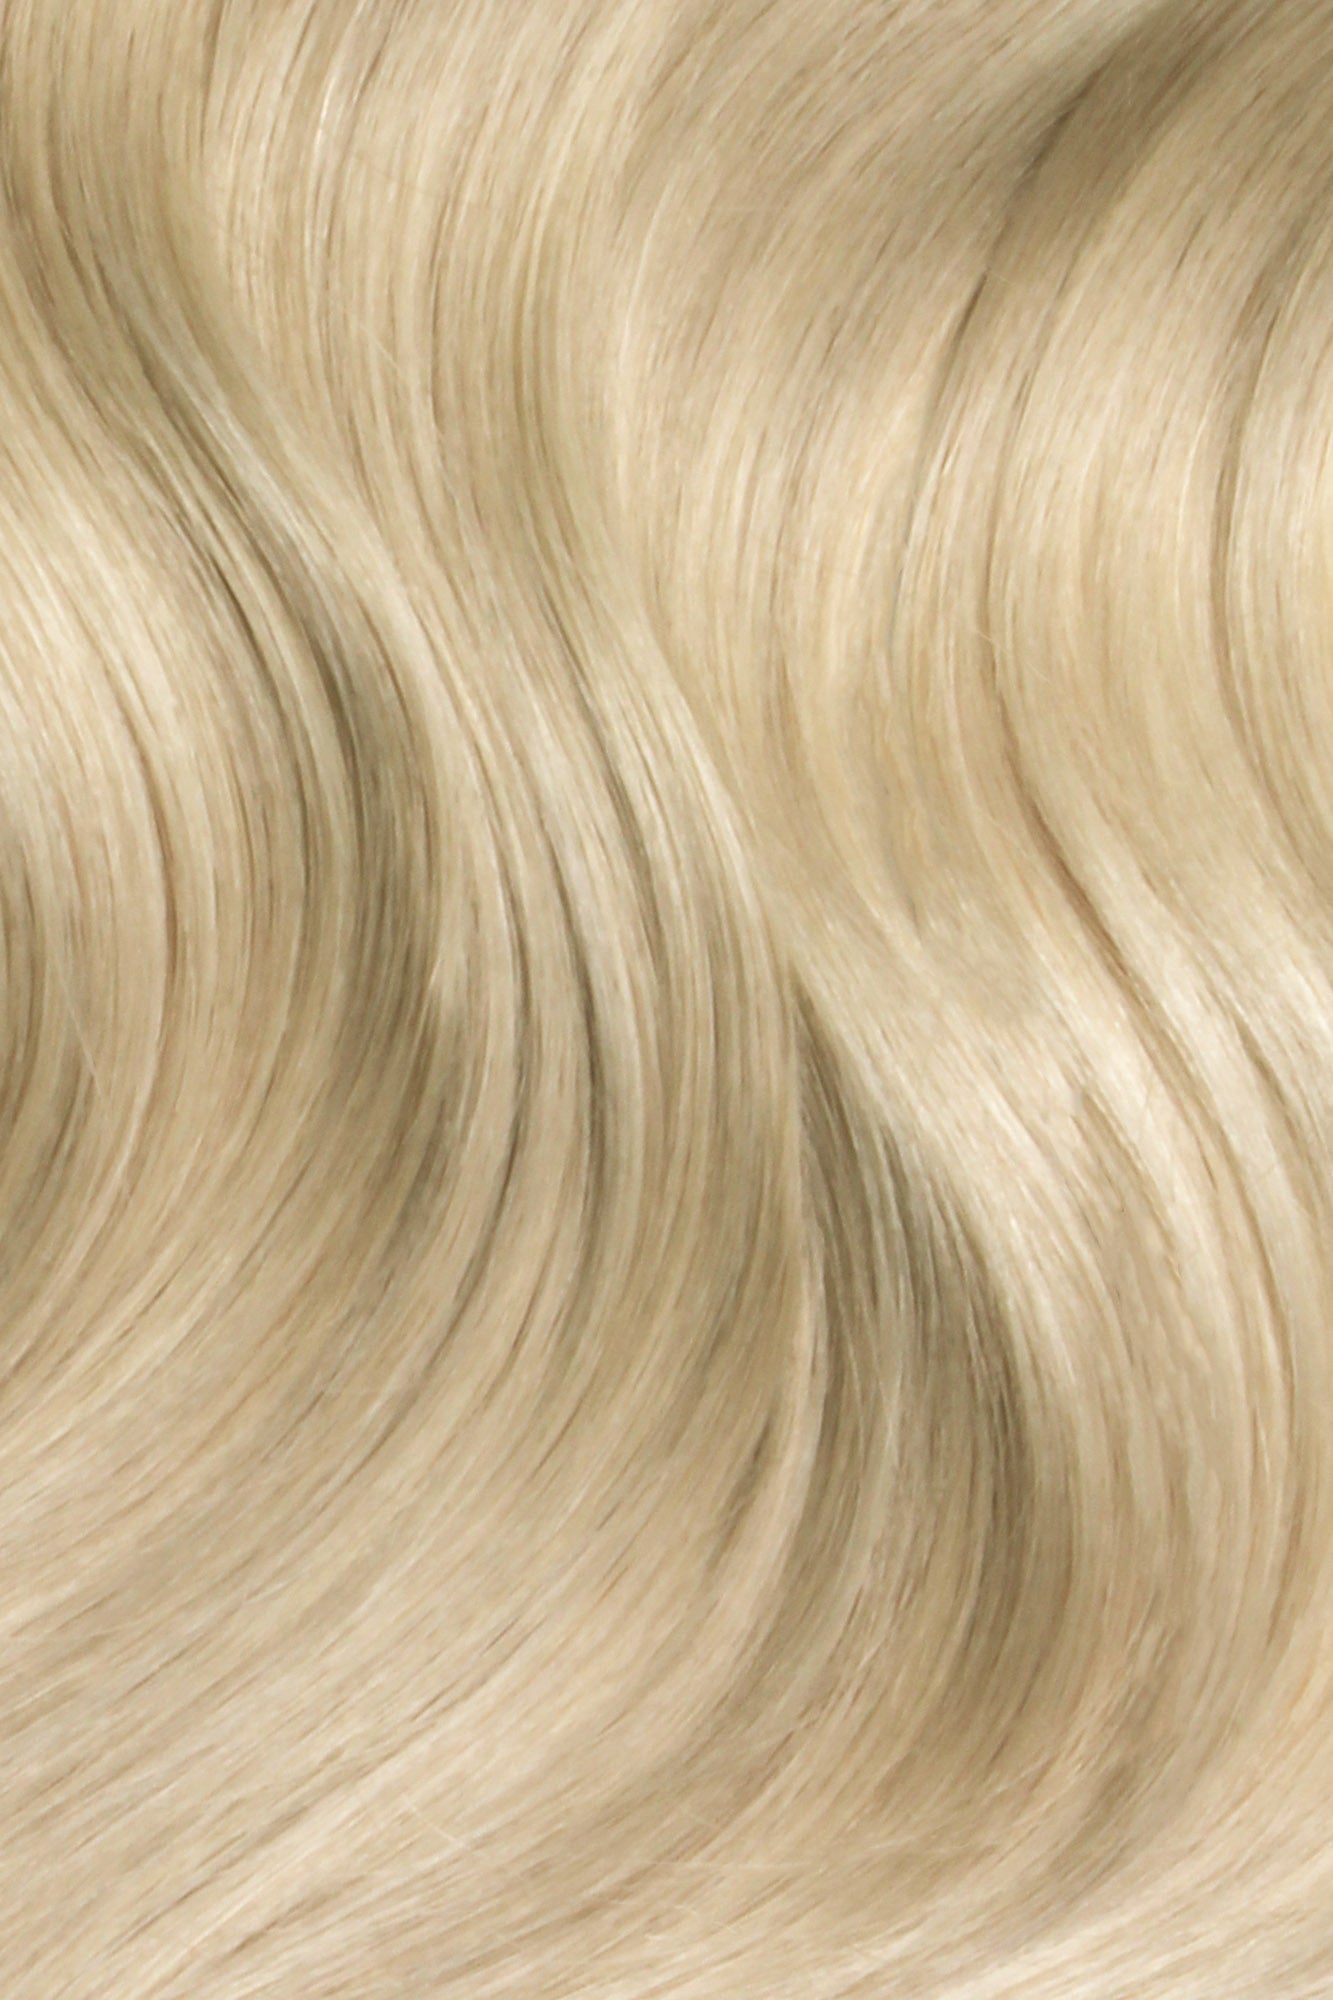 Nano Bonds 24 Inches - SWAY Hair Extensions Hollywood-Ash-Blonde-18A-613A Ultra-fine, invisible bonds for a flawless, natural look. 100% Remy Human hair, lightweight and versatile. Reusable and perfect for individual or salon use.